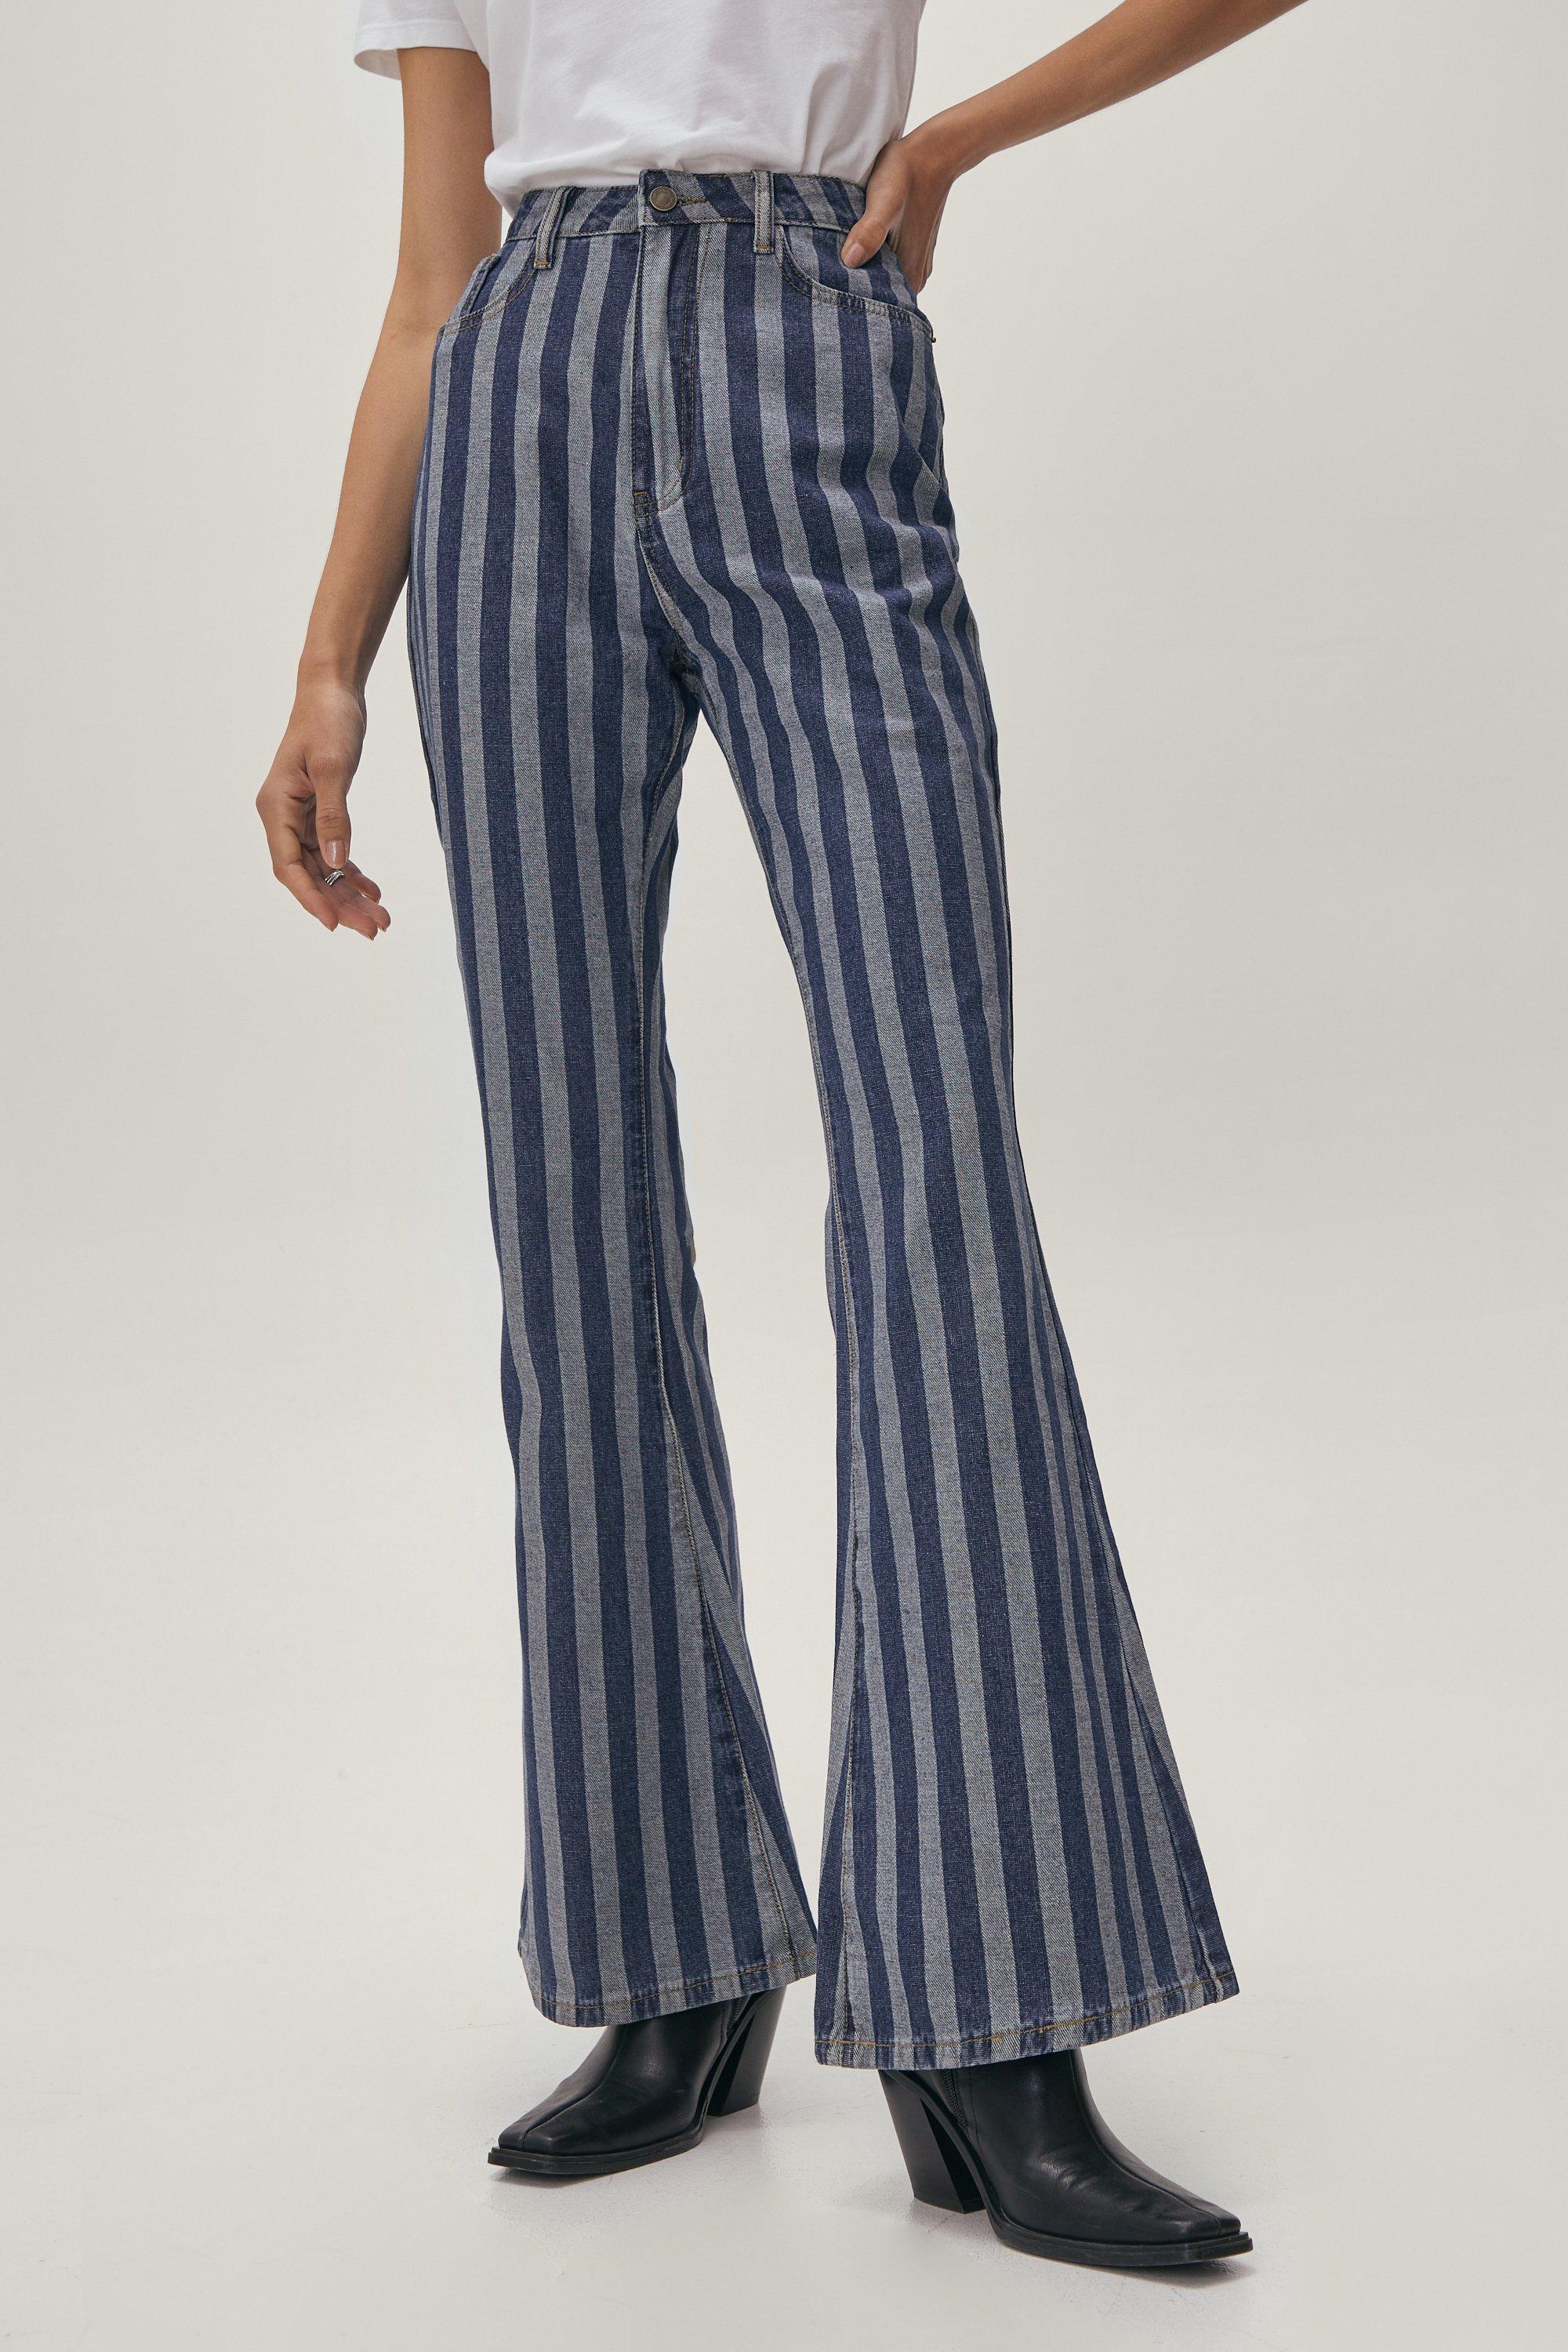 Striped Fit and Flare Denim Jeans